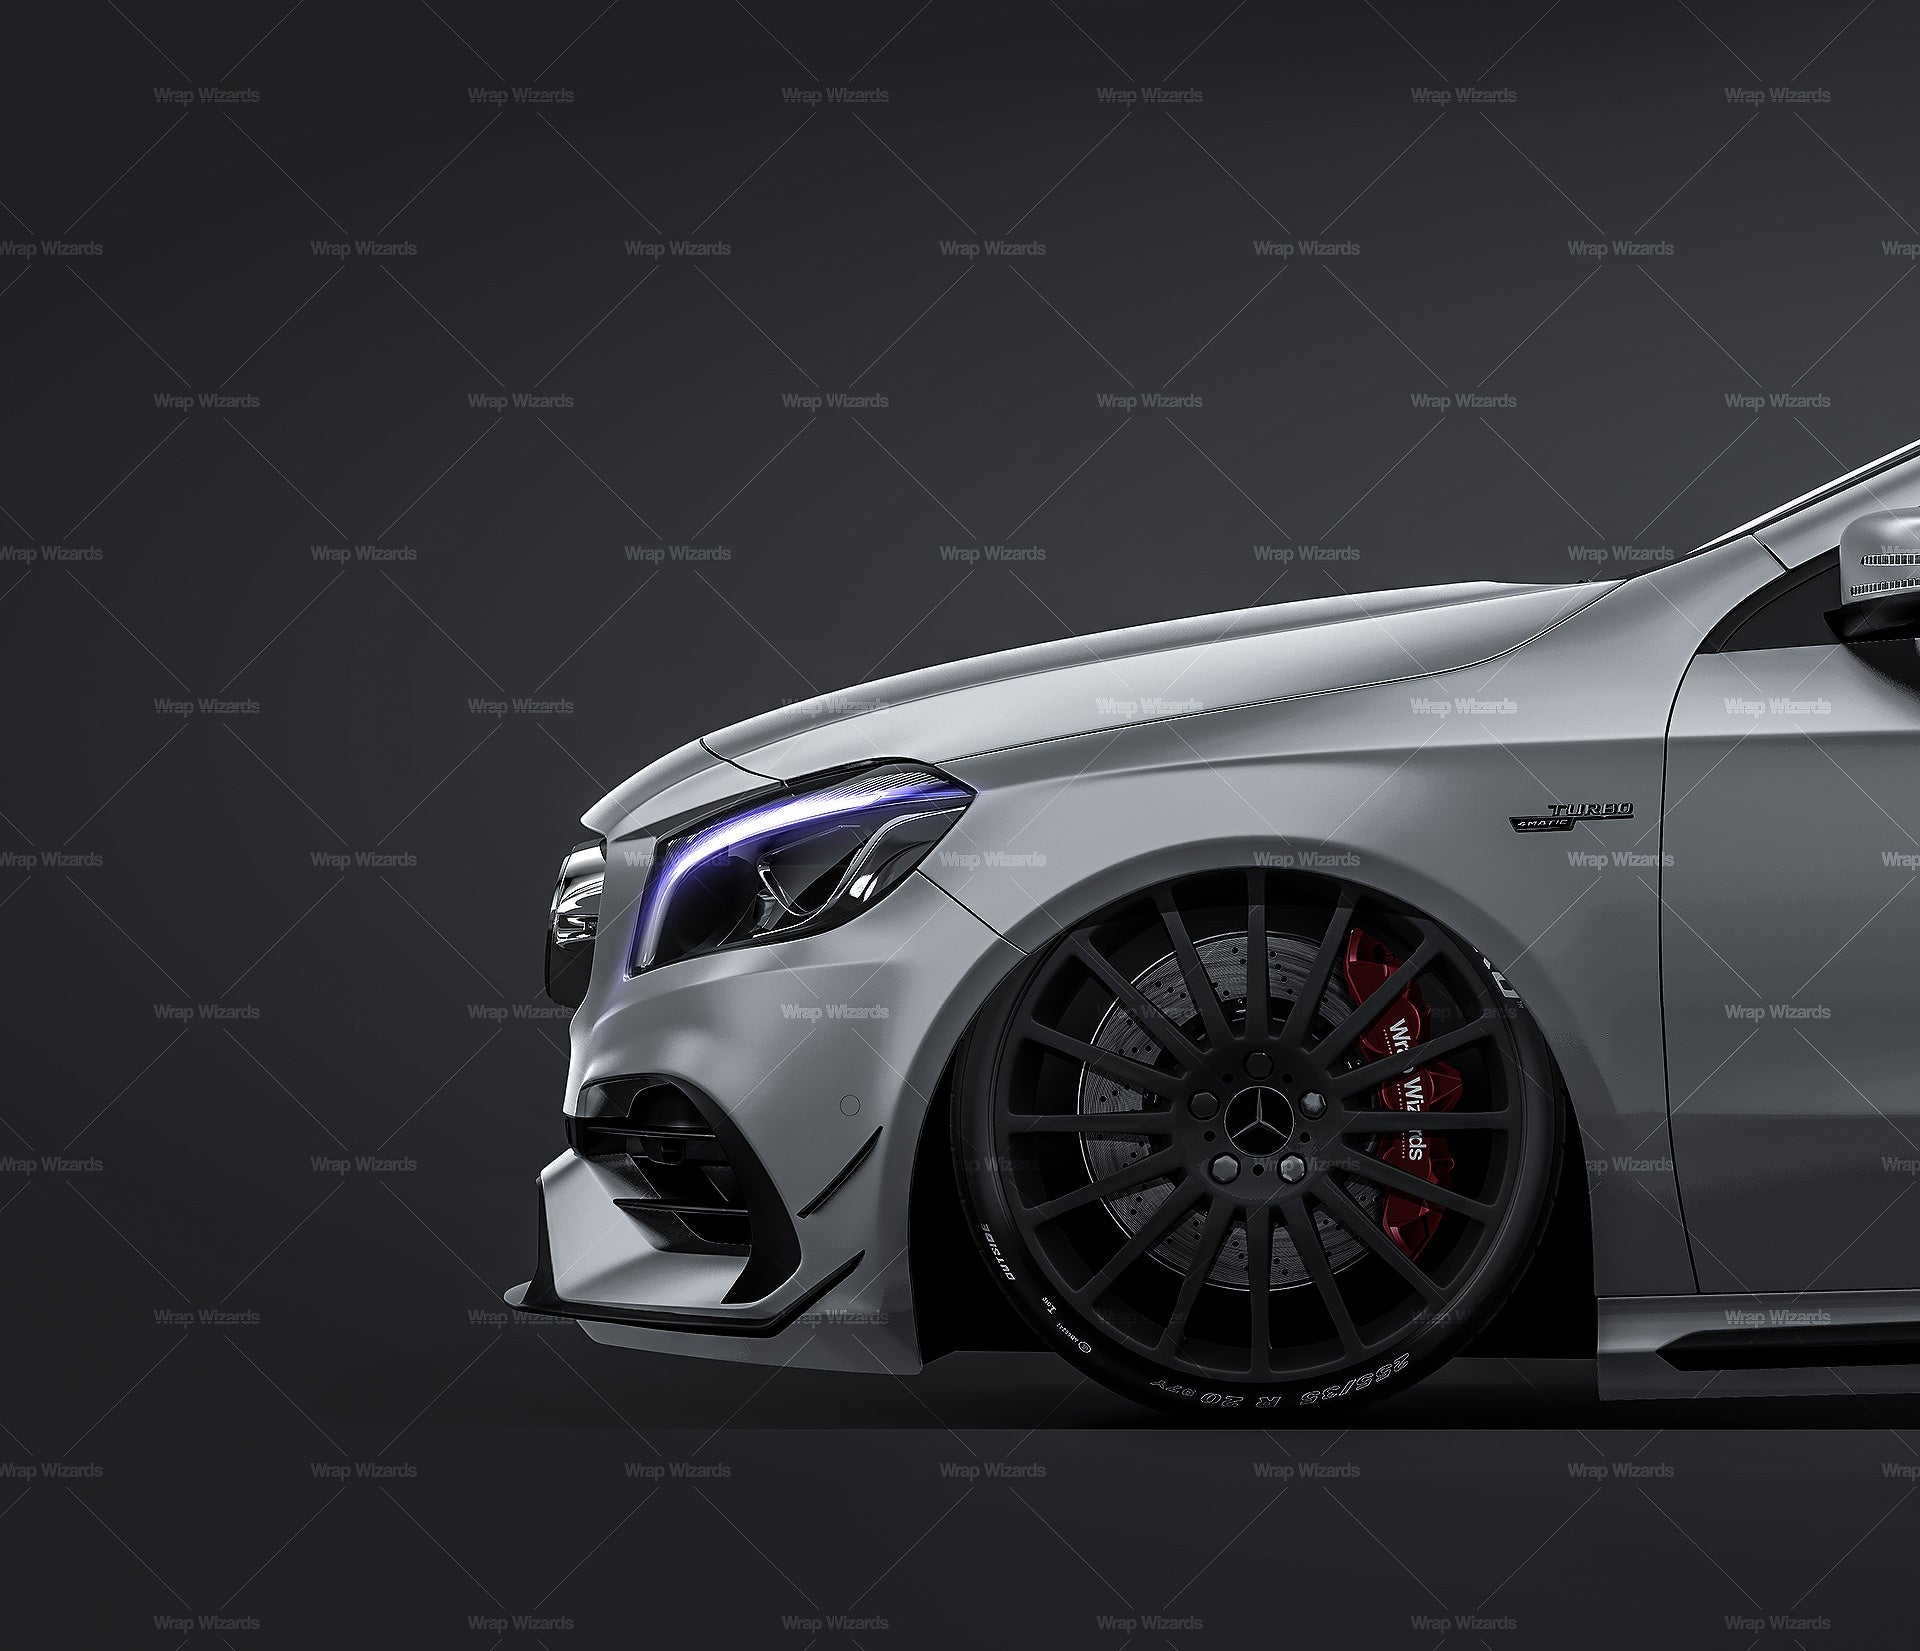 Mercedes-Benz A-Class A45 AMG with spoiler wing satin matt finish - all sides Car Mockup Template.psd